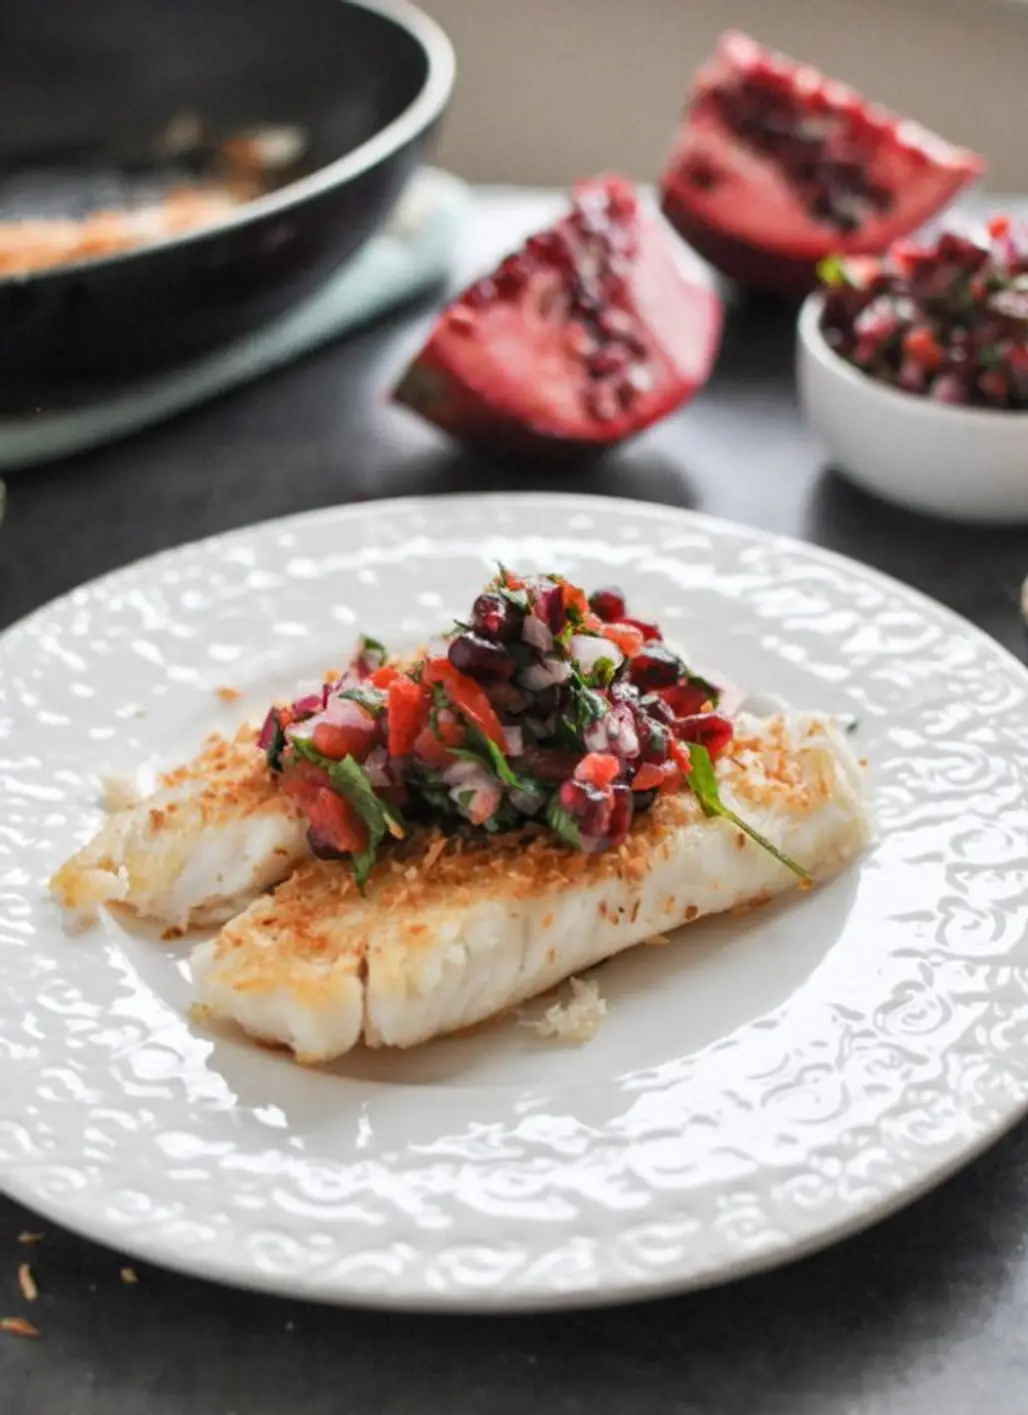 Coconut-crusted Tilapia with Pomegranate Salsa